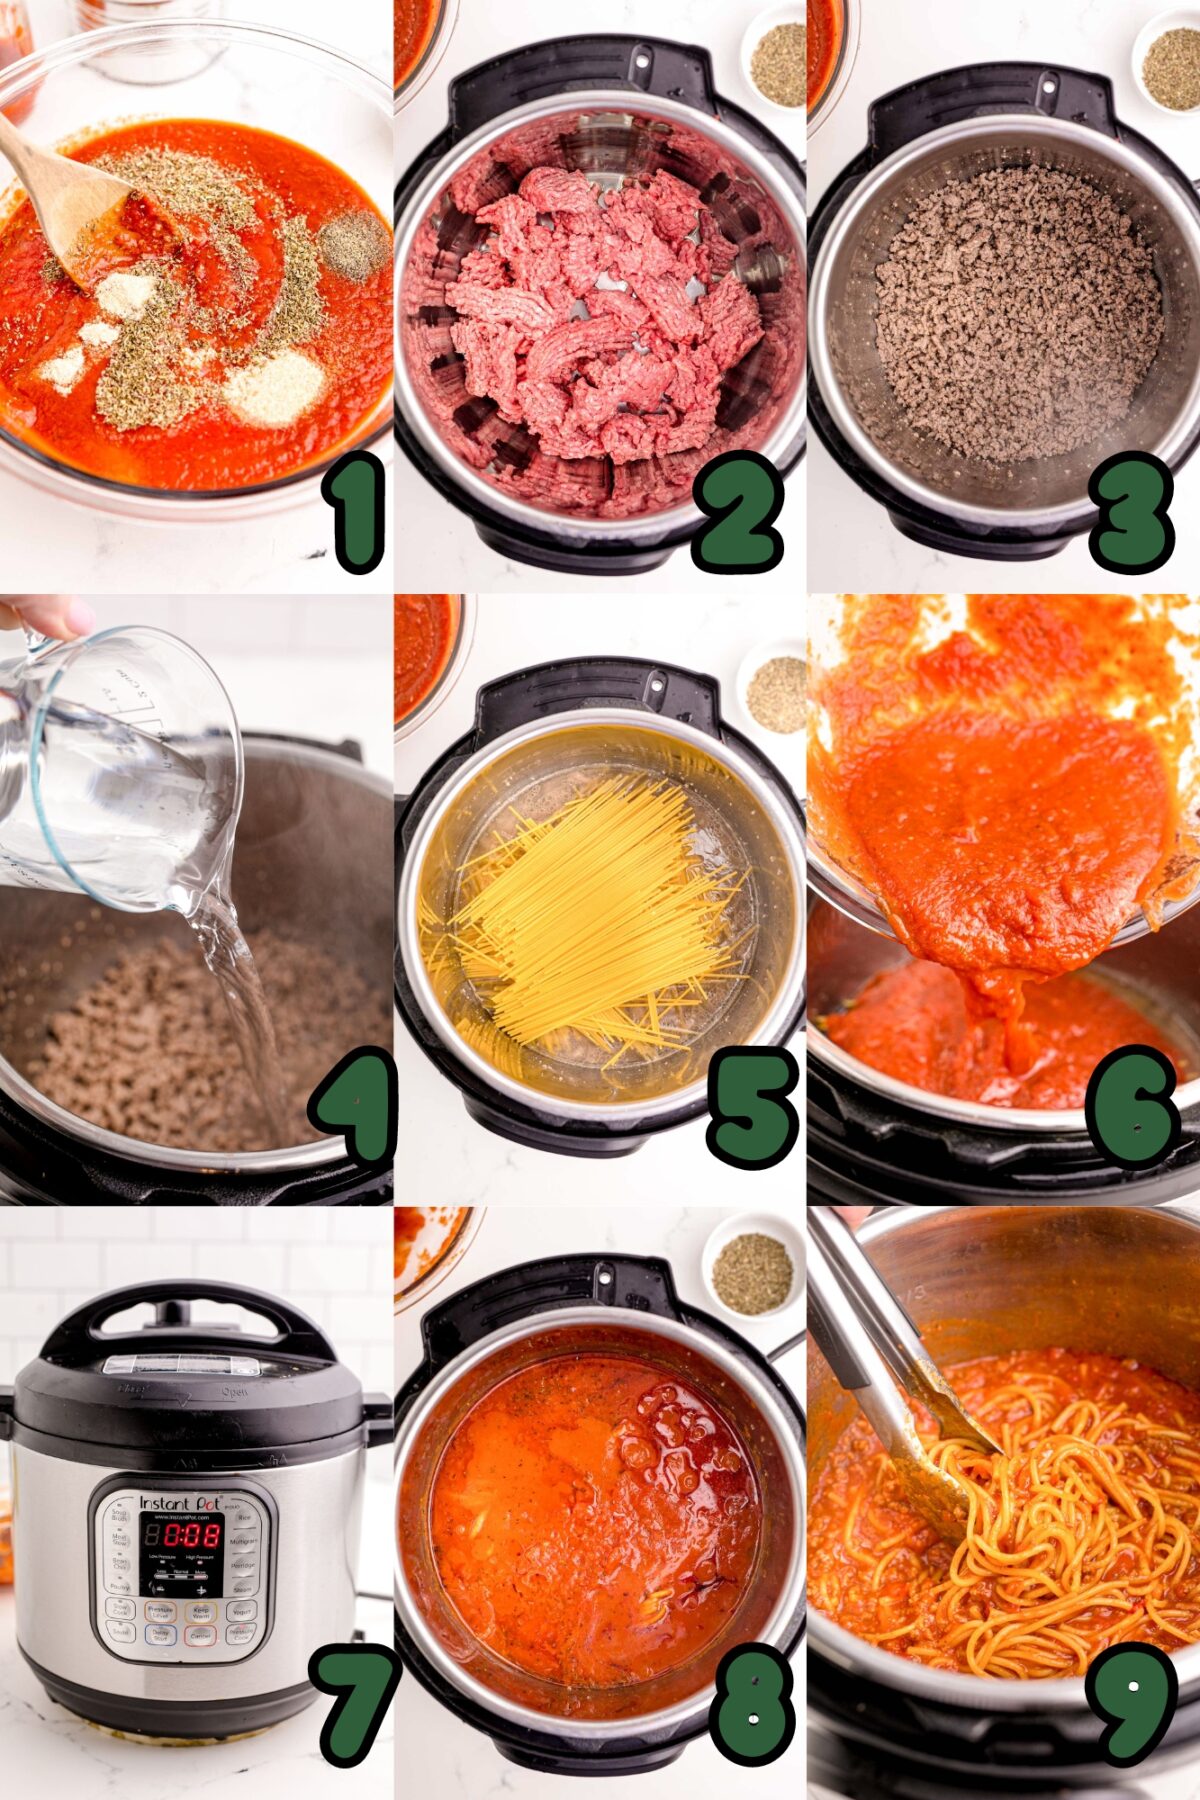 step by step instructions on how to make instant pot spaghetti